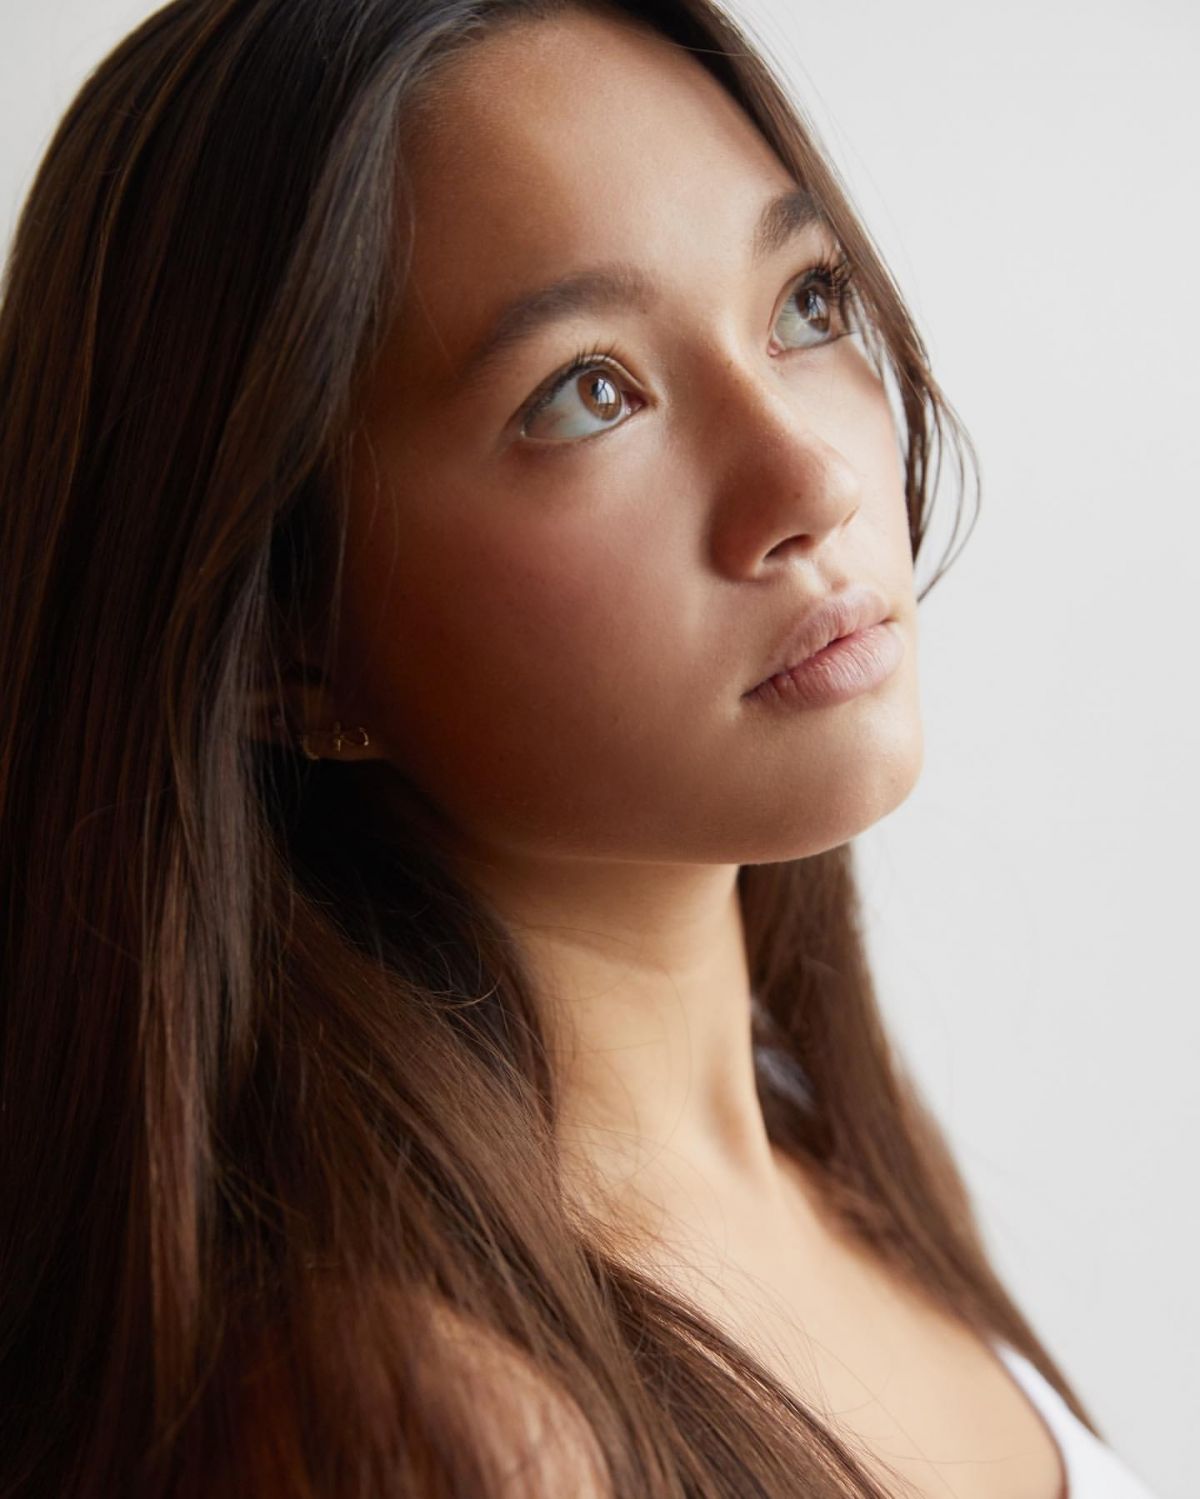 LILY CHEE at a Photoshoot, September 2020 – HawtCelebs